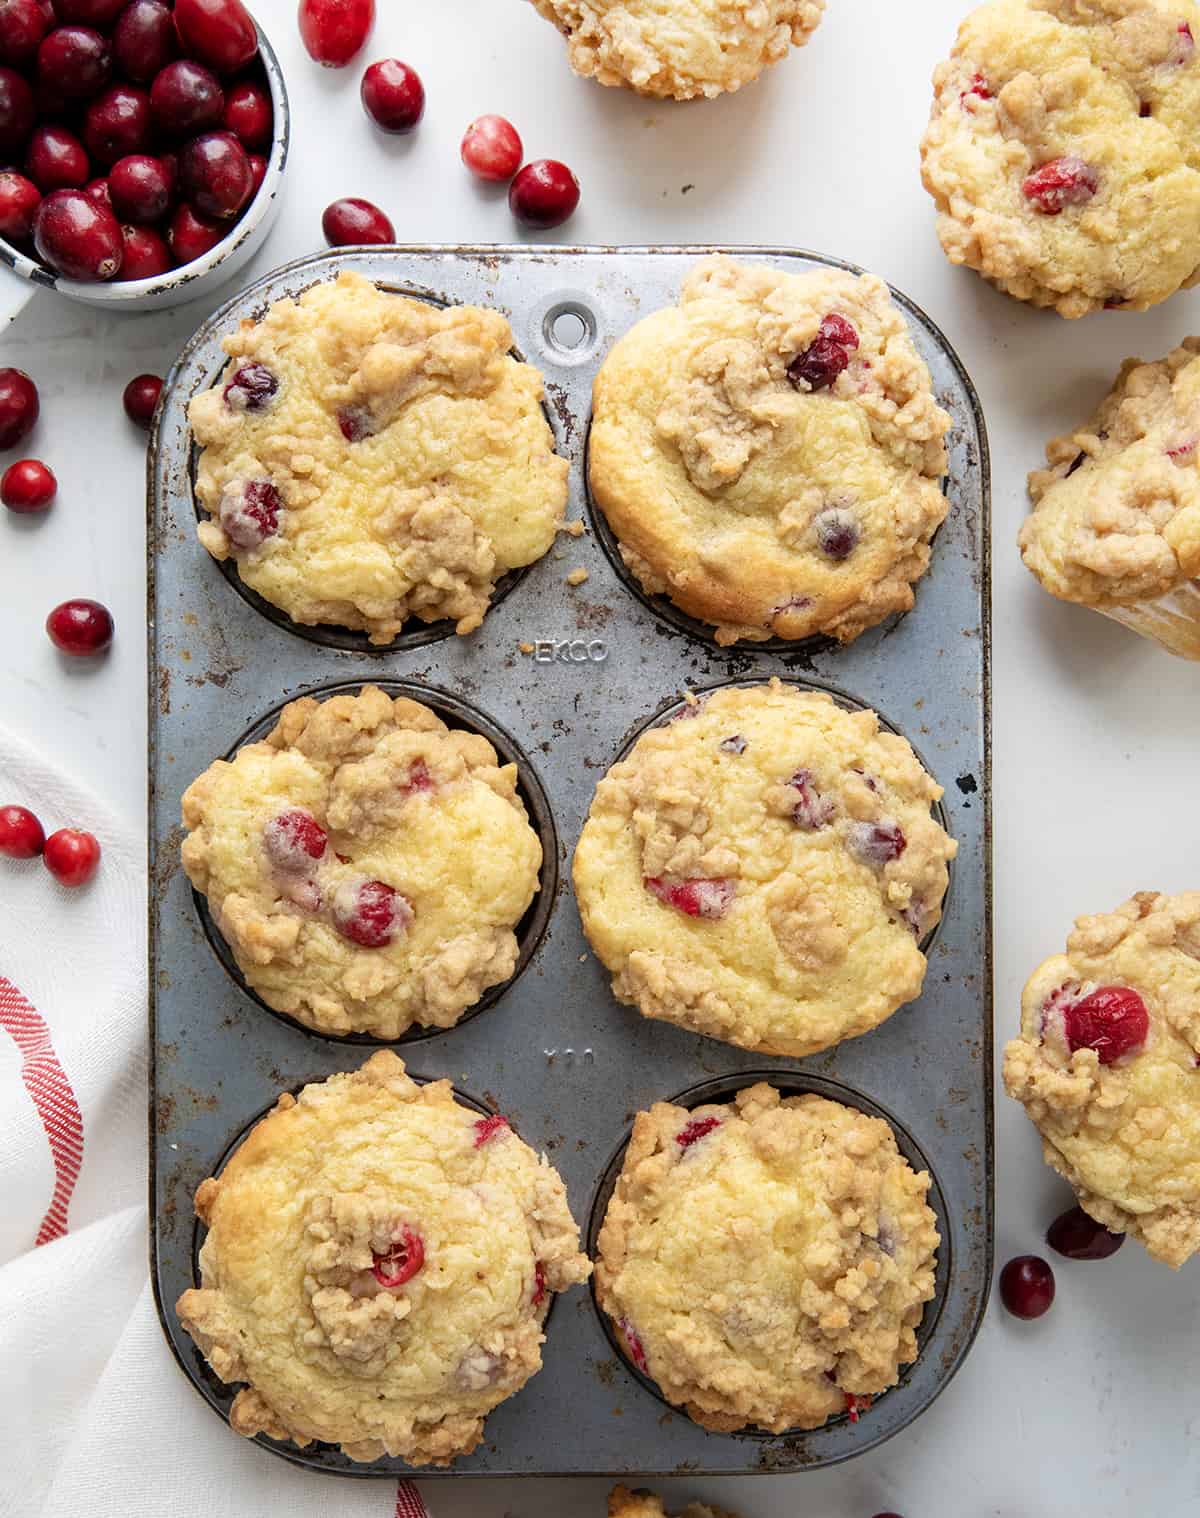 Cranberry Cream Cheese Muffins in a muffin tin on a white table from overhead.